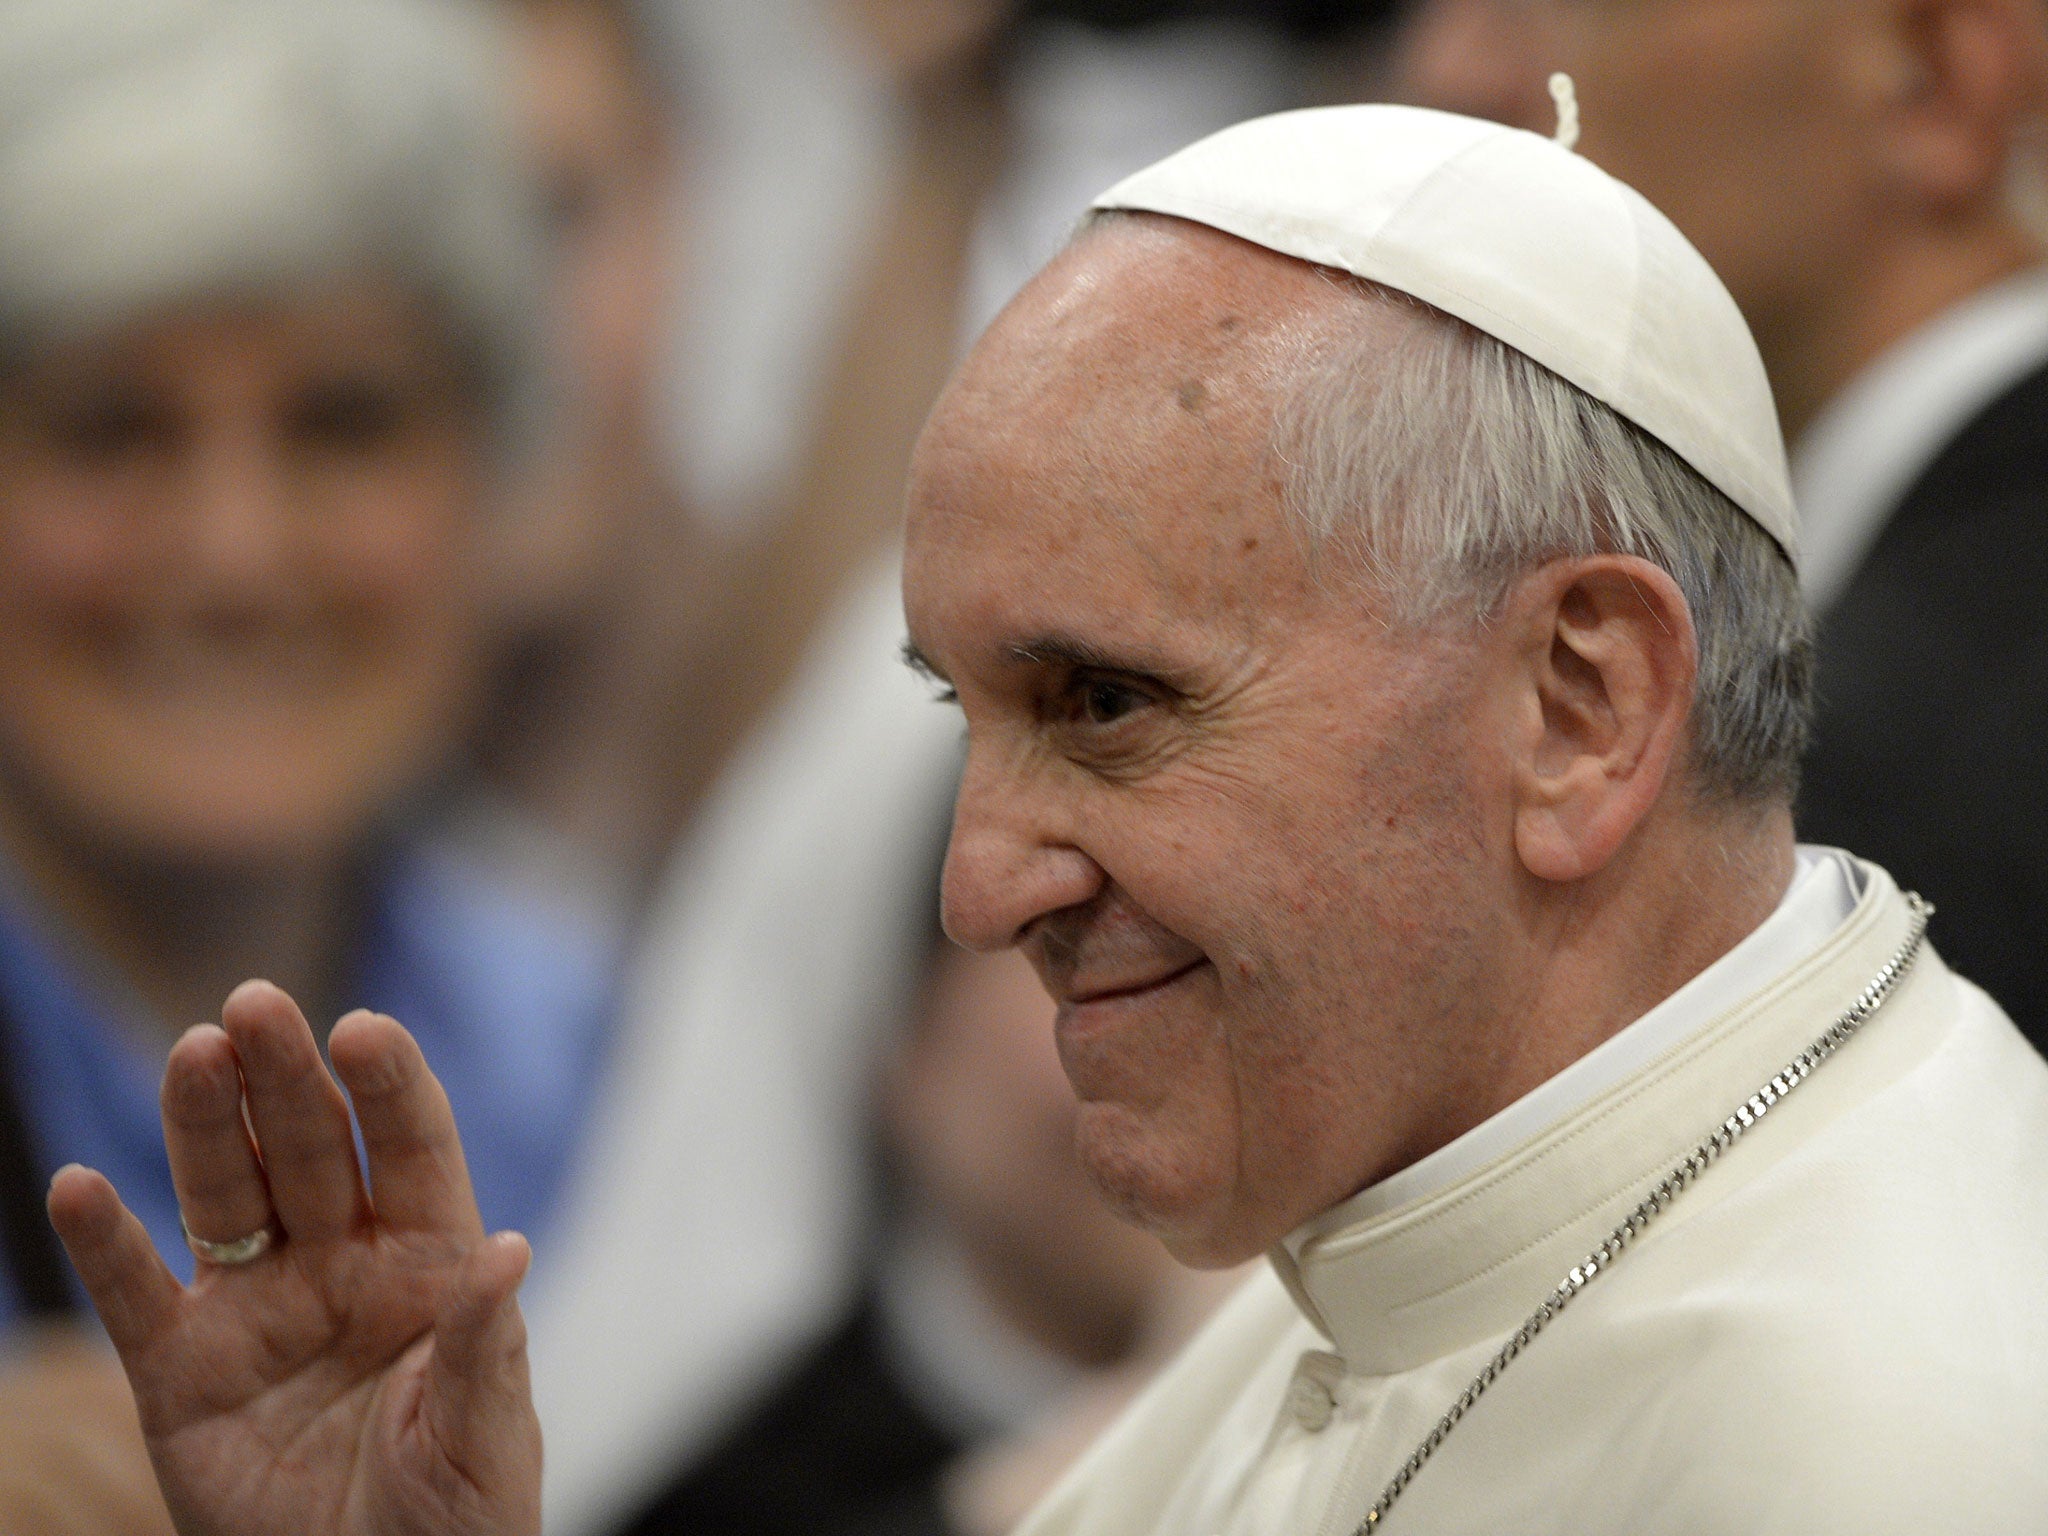 Pope Francis condemned the 'cult of money' in his first finance speech